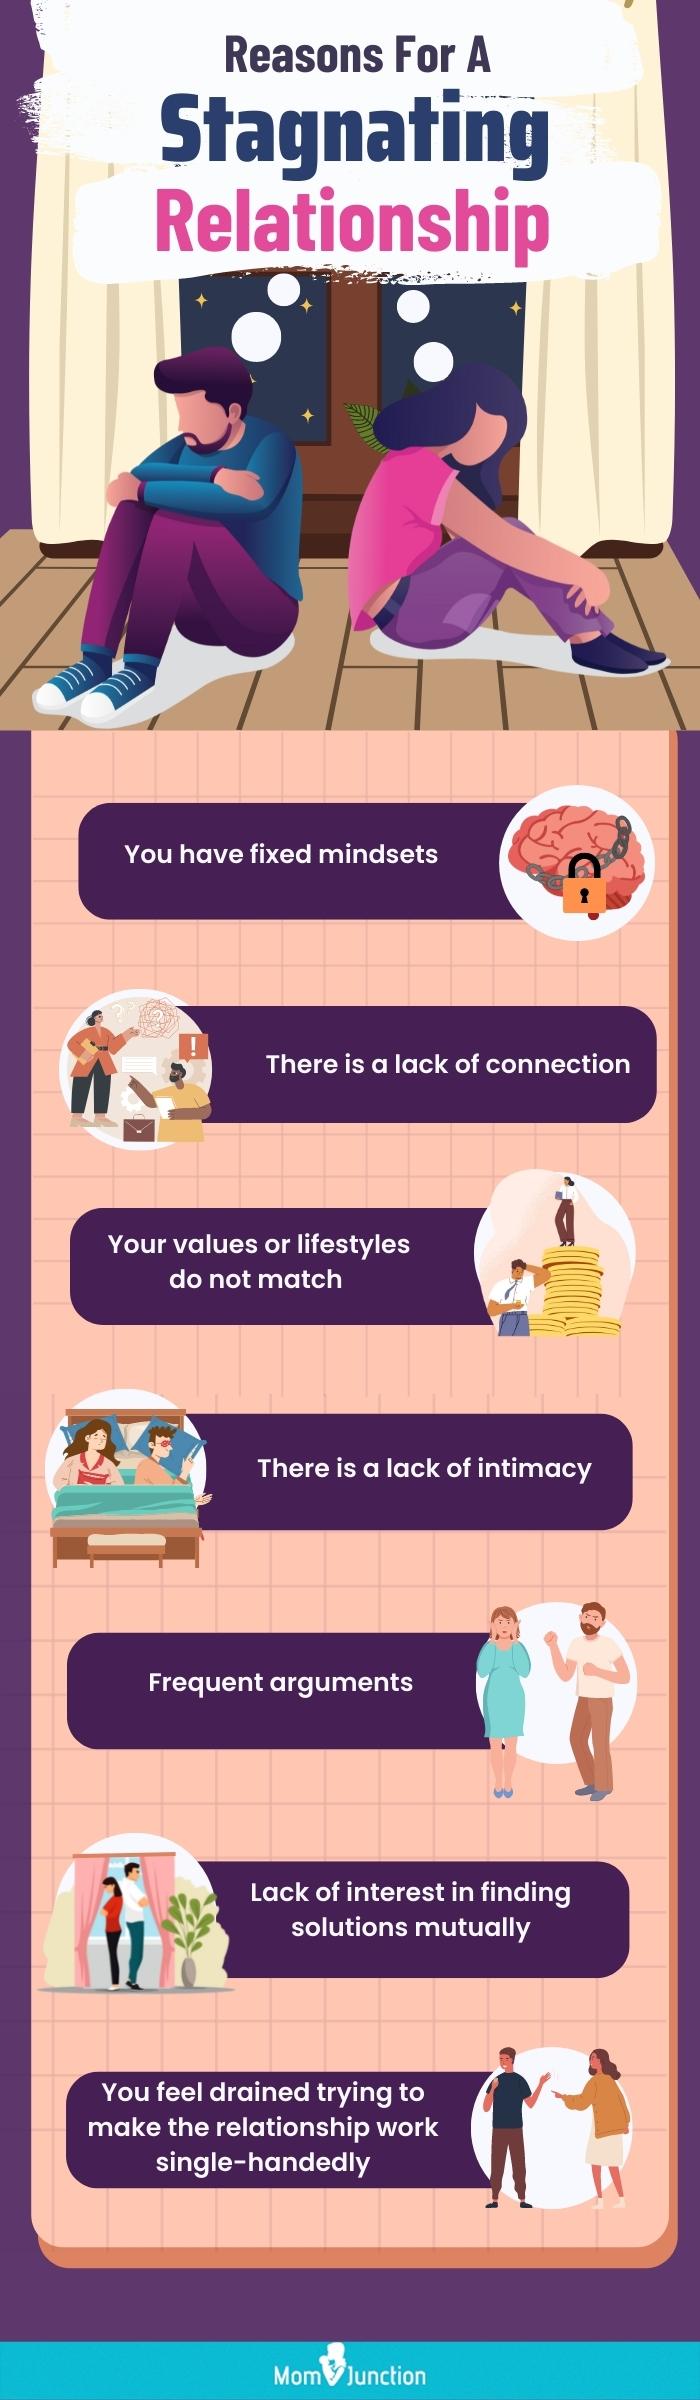 causes of relationship to become stagnant (infographic)